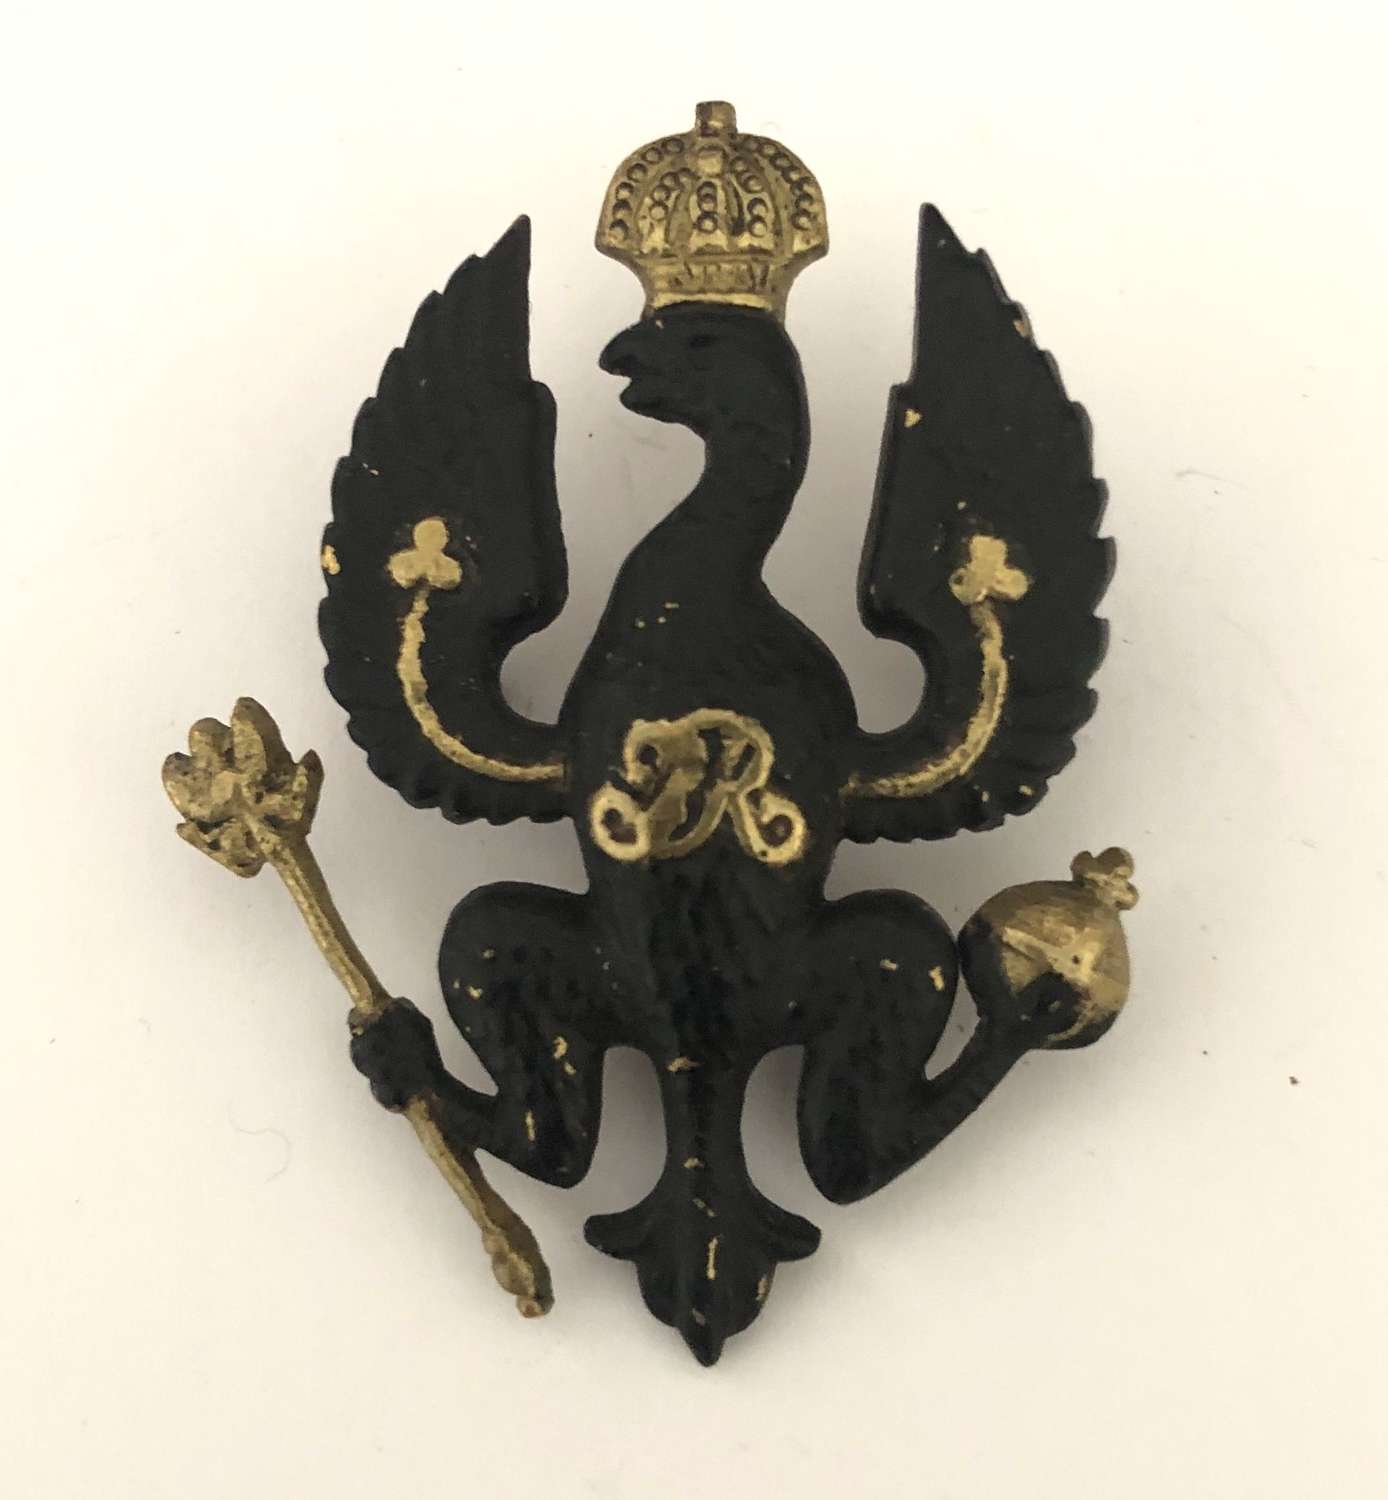 14th King's Hussars early Edwardian NCO's arm badge.